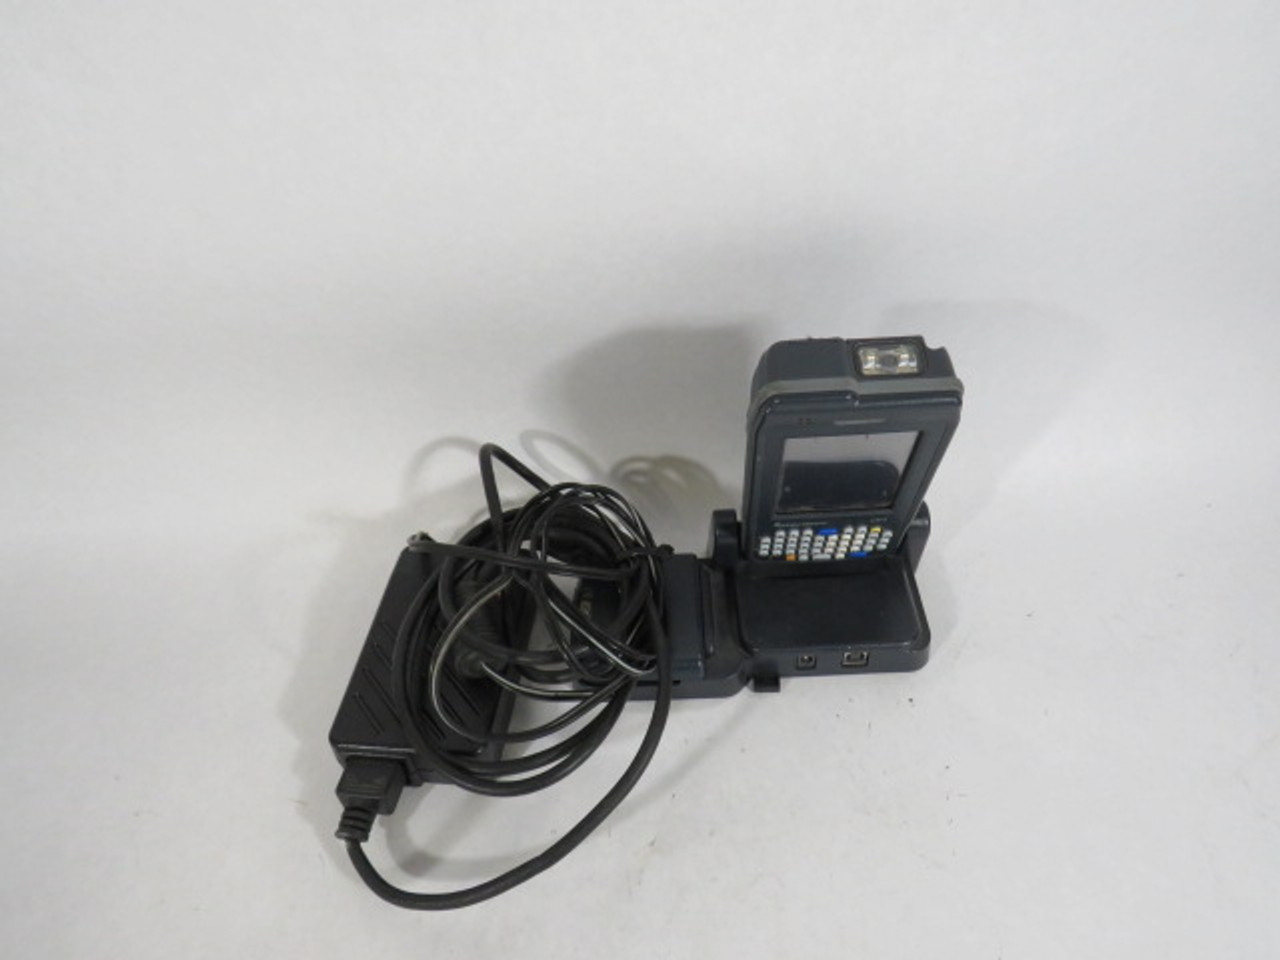 Intermec CN3 Handheld Computer w/Stand & Cables *NO Power* ! AS IS !